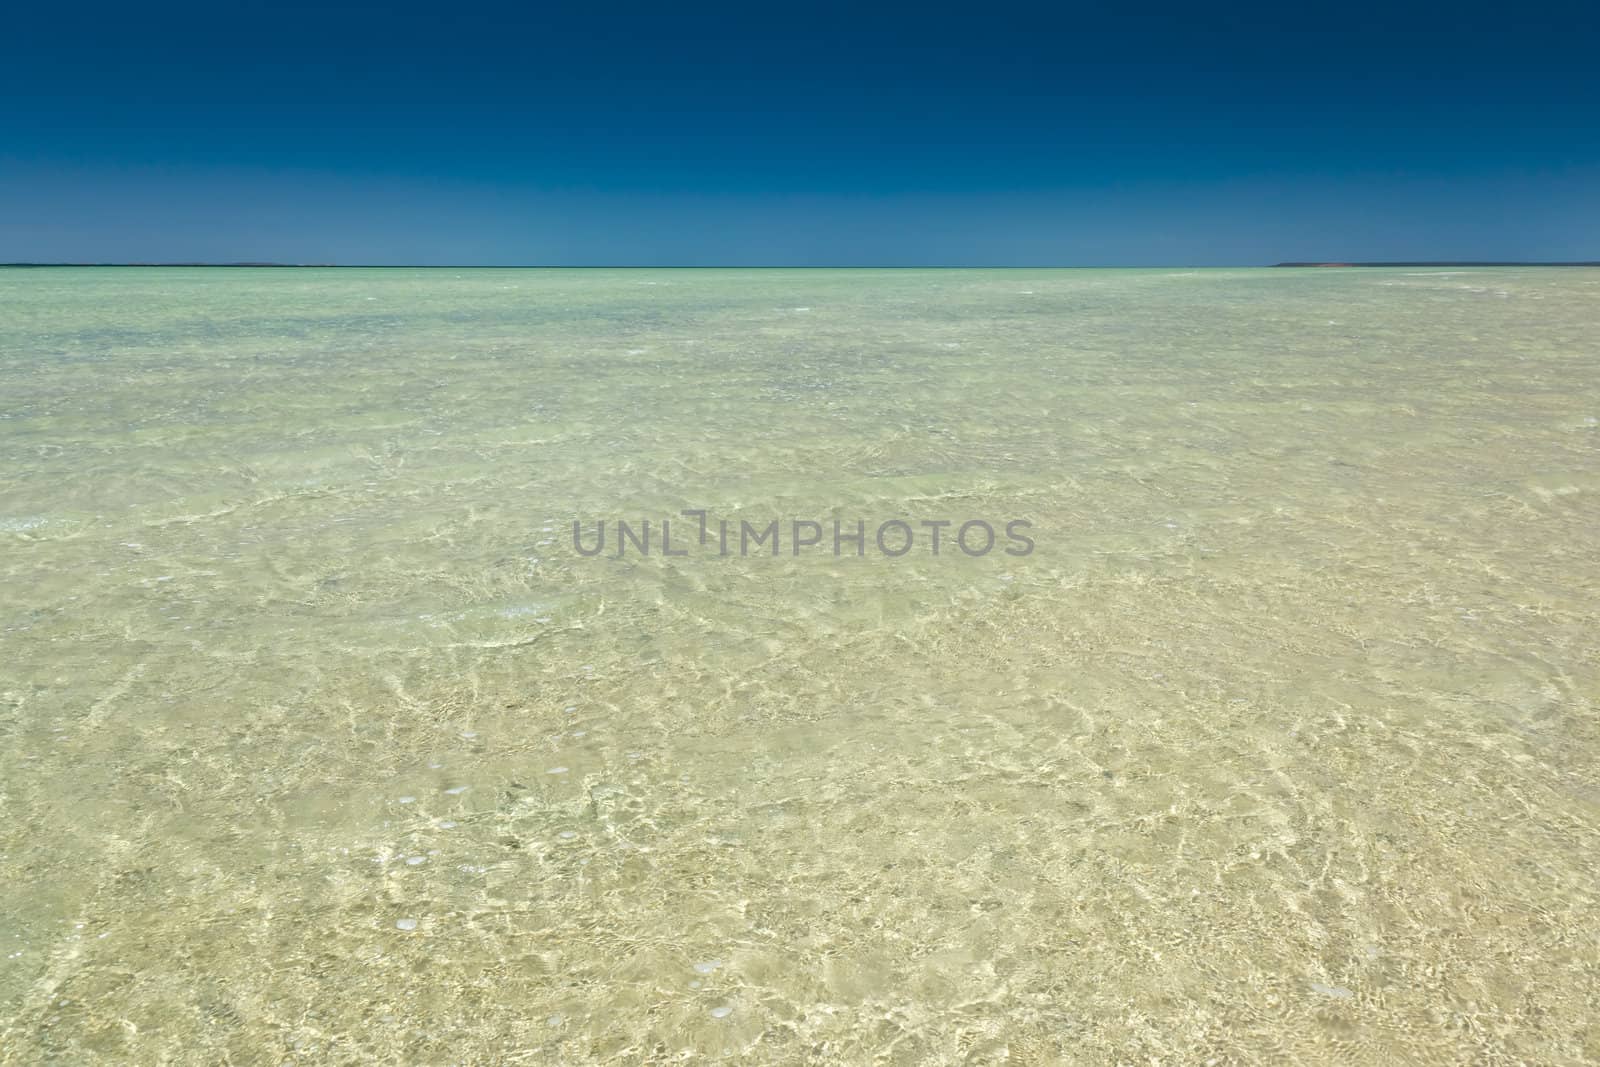 An image of the ocean and the blue sky